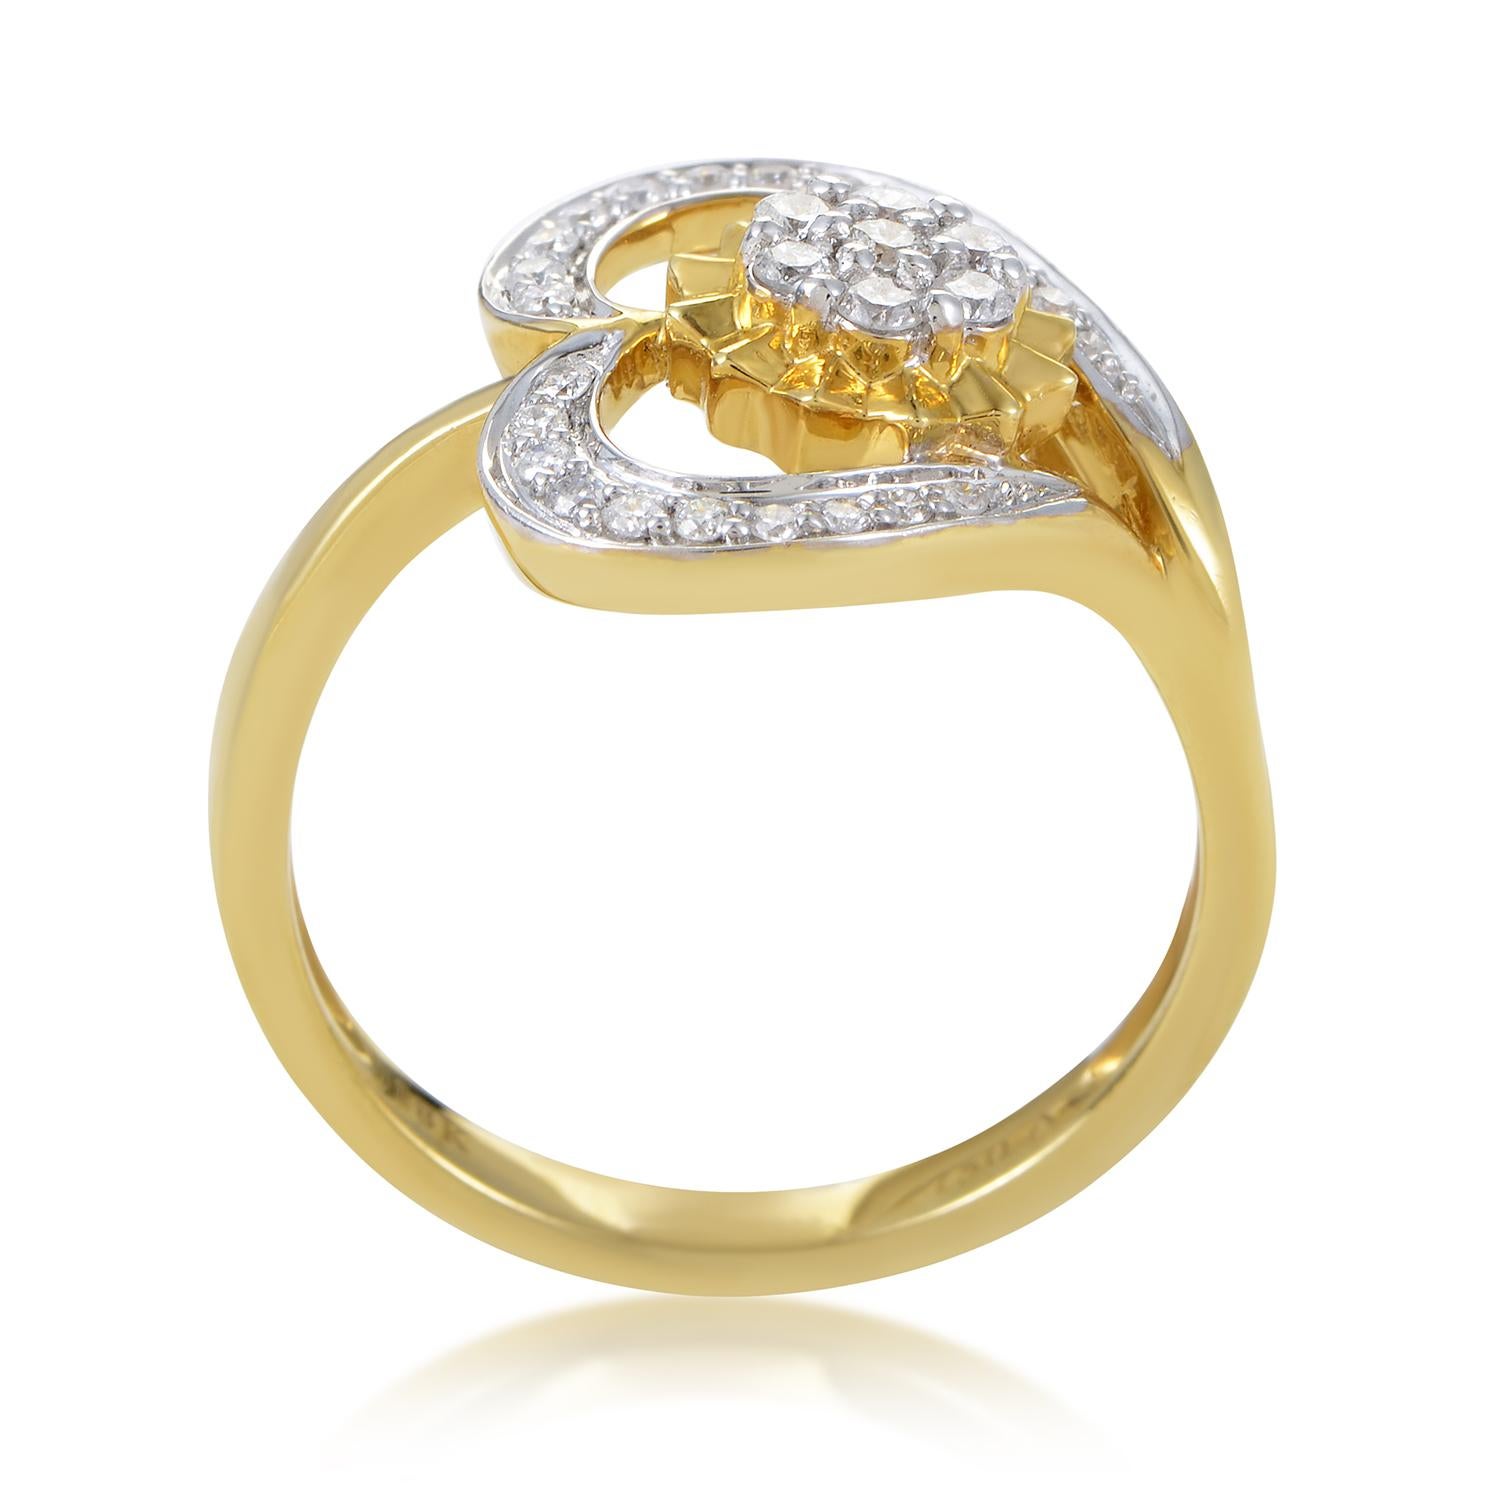 In order to emphasize the romantic shape of a heart in spectacular fashion, bright glistening diamonds weighing in total 0.33ct are arranged at the top of this enchanting ring, brilliantly contrasting the warm nuance of 18K yellow gold.
Ring Top